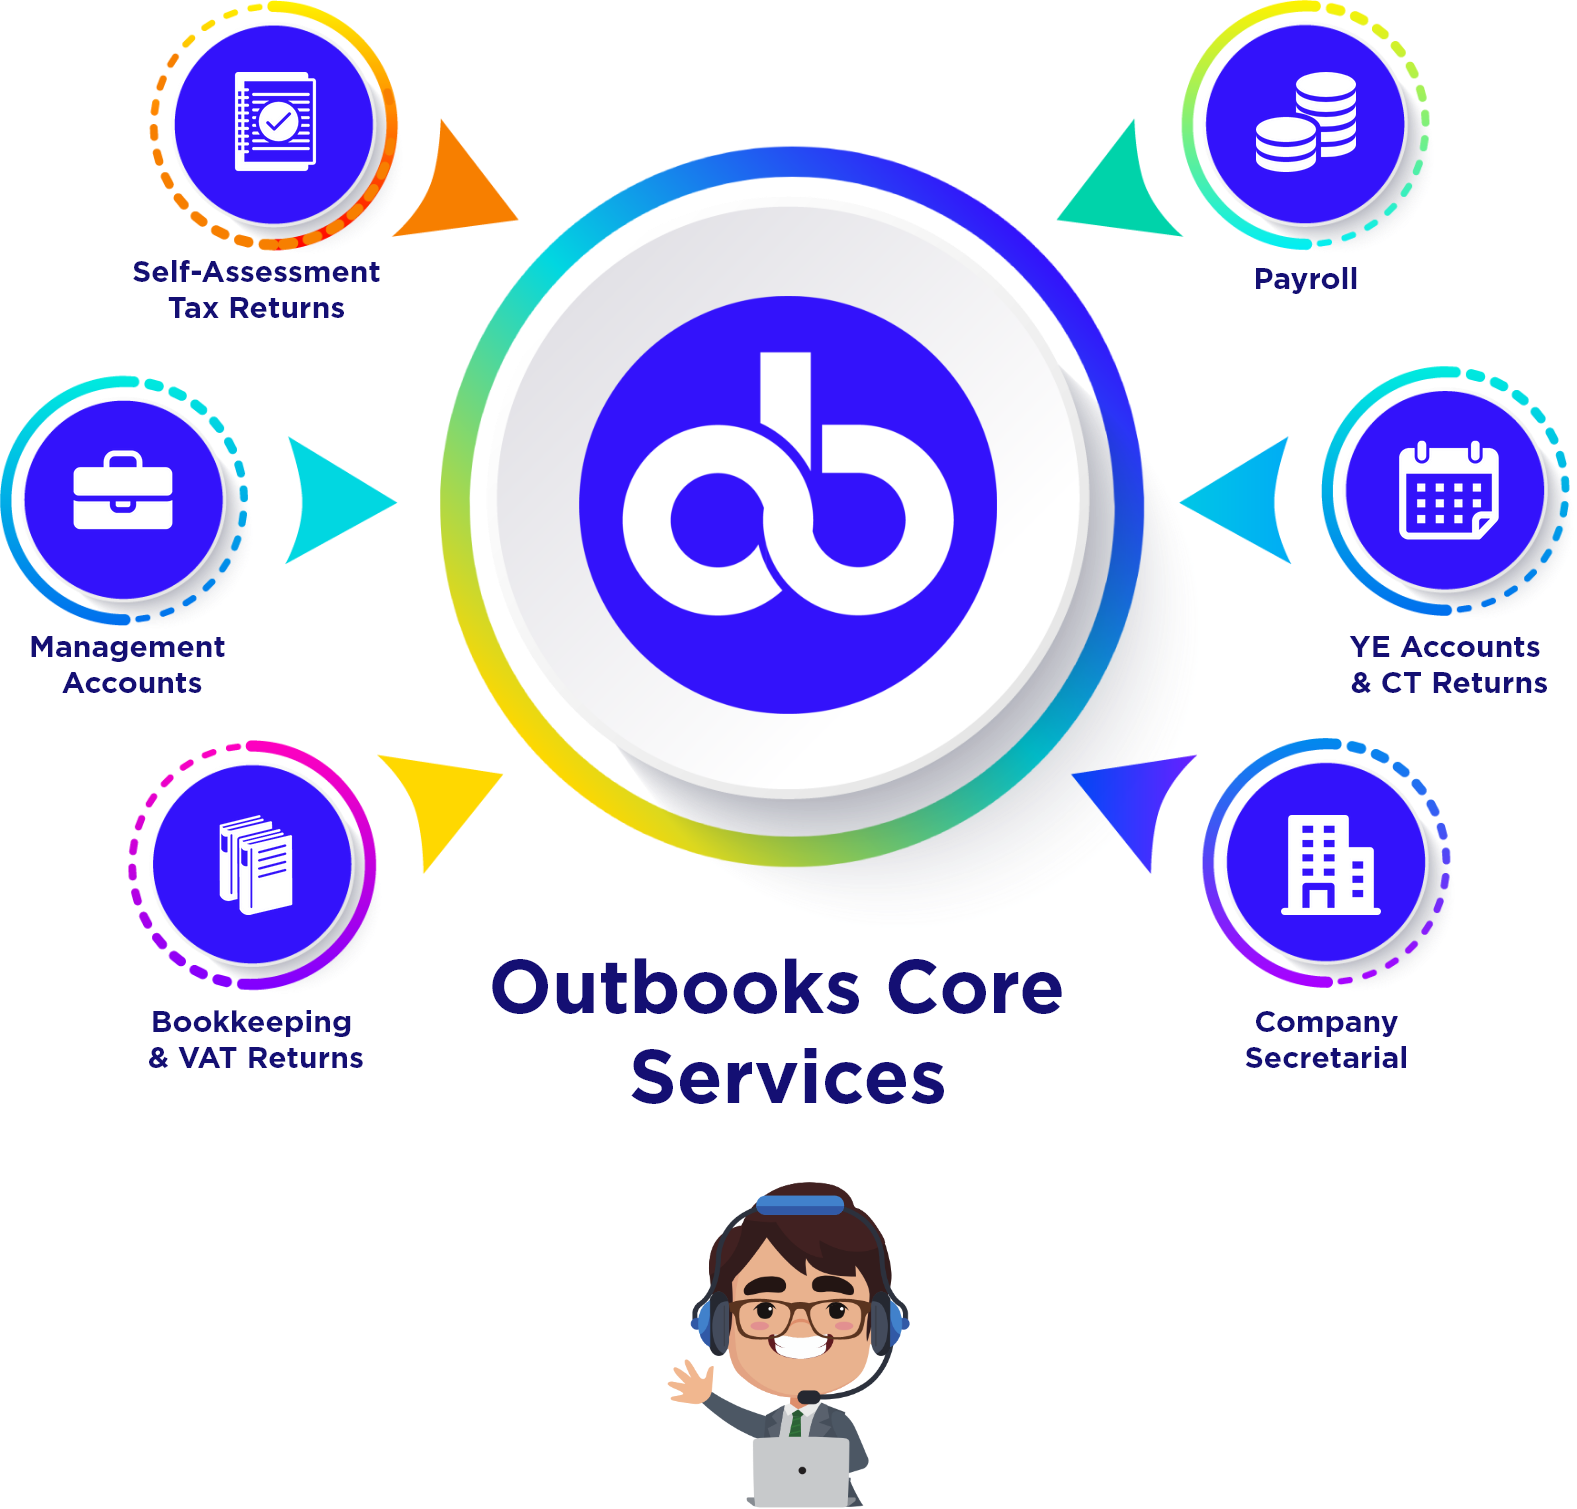 Outbooks Core Services